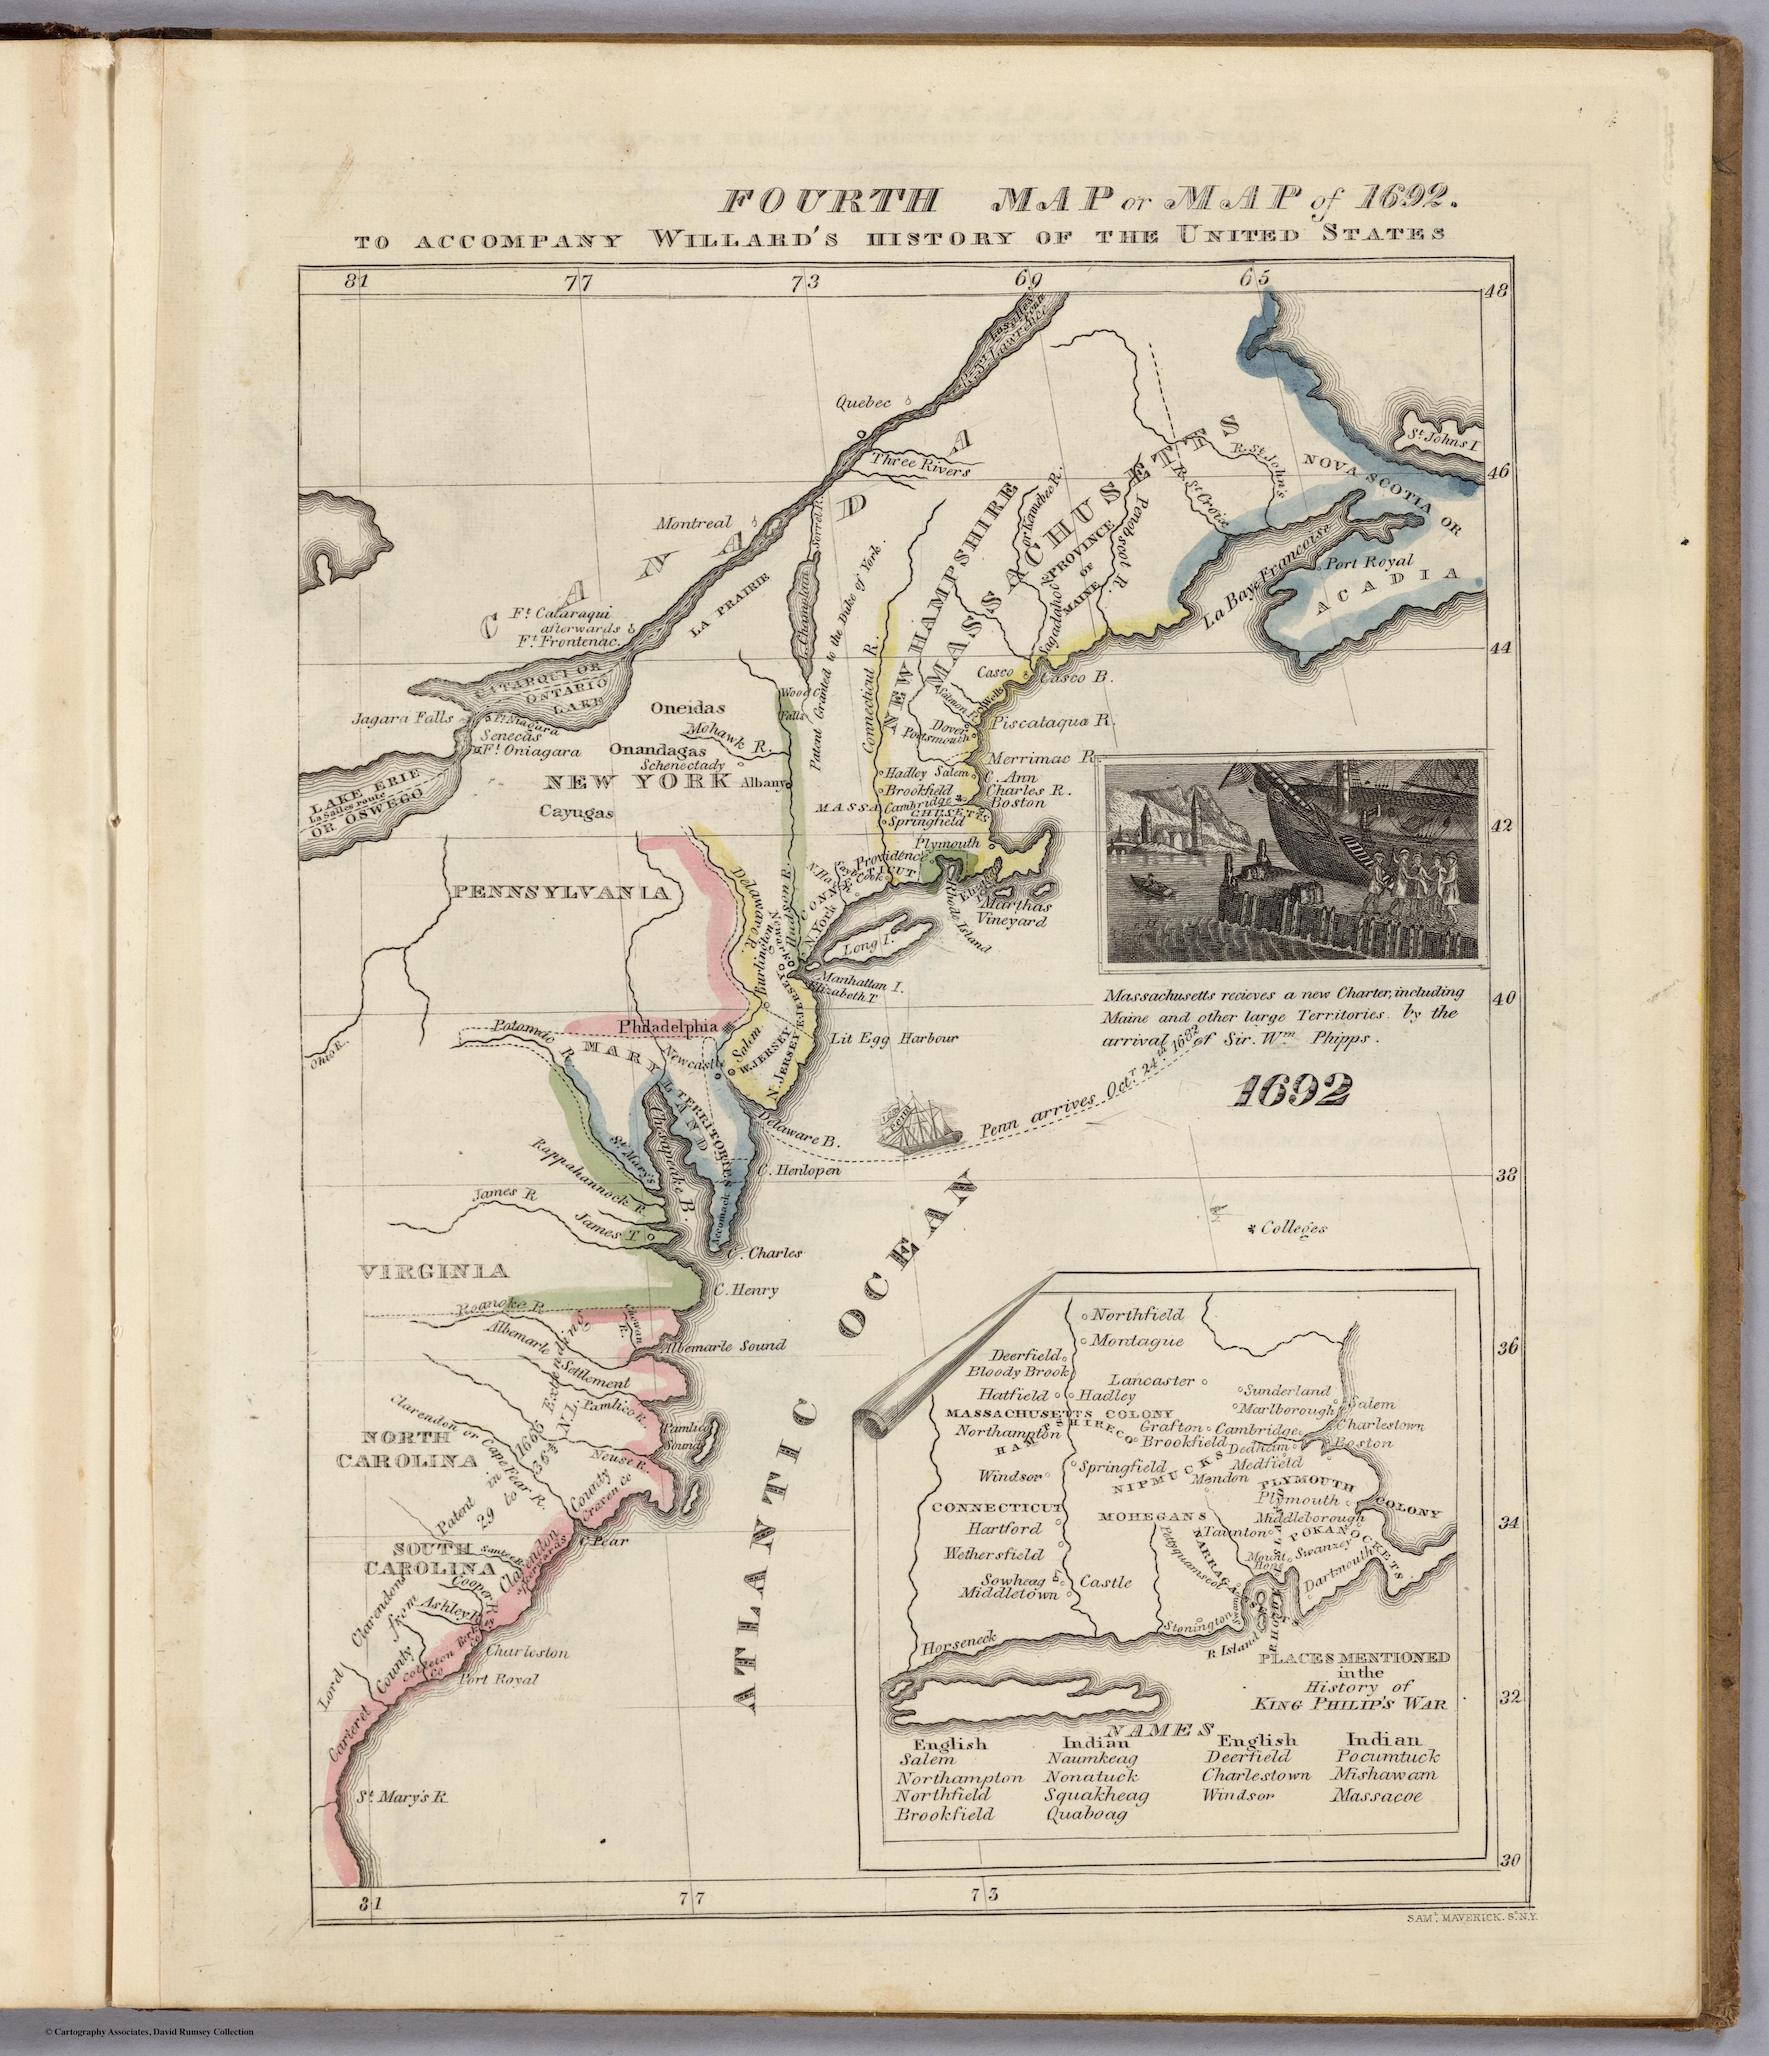 A more detailed view of the eastern coast of North America in 1692, with the named addition of several major states like New York, Pennsylvania, Mayland, and North and South Carolina, as well as the Great Lakes Erie and Ontatio. Blue, yellow, green, and pink highlights are drawn along the coast. Halfway down the right side of the page, an illustration shows a large ship with several figures standing on a dock beside it in the foreground, along with a town and mountains in the background beyond the water. The caption reads, “Massachusetts receives a new Charter, including Maine and other large Territories, by the arrival of Sir W. Phipps.” In the bottom right-hand corner, a different, smaller view of the north-east coast is presented that includes both English and Indian names of, as the title says, “Places Mentioned in History of King Philip’s War.” Two columns of English names line up next to columns of their Indigenous equivalent. The pairs are as follows: Salem and Naumkeag; Northampton and Nonatuck; Northfield and Squakheag; Brookfield and Quaboag; Deerfield and Pocumtuck; Charlestown and Mishawam; Windsor and Massacoe.